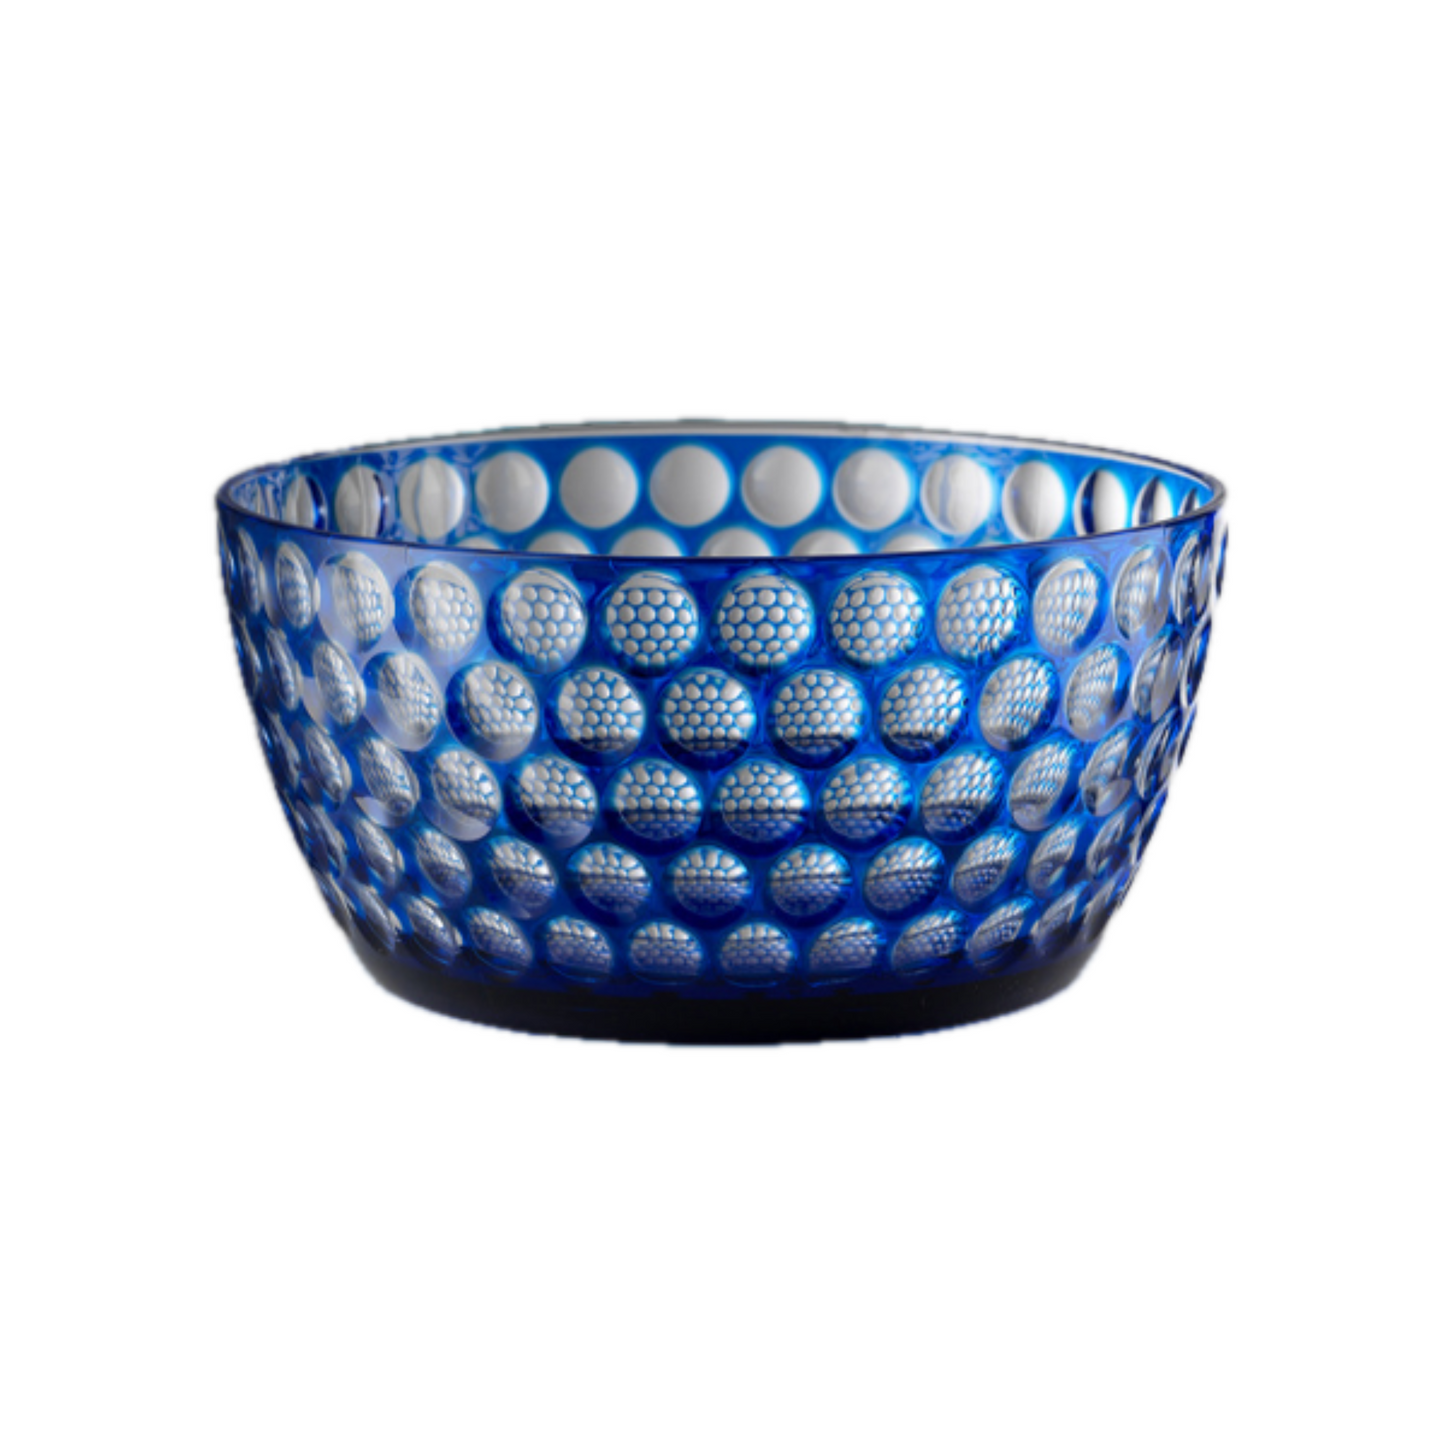 Lente Small Bowls - Sets of 2